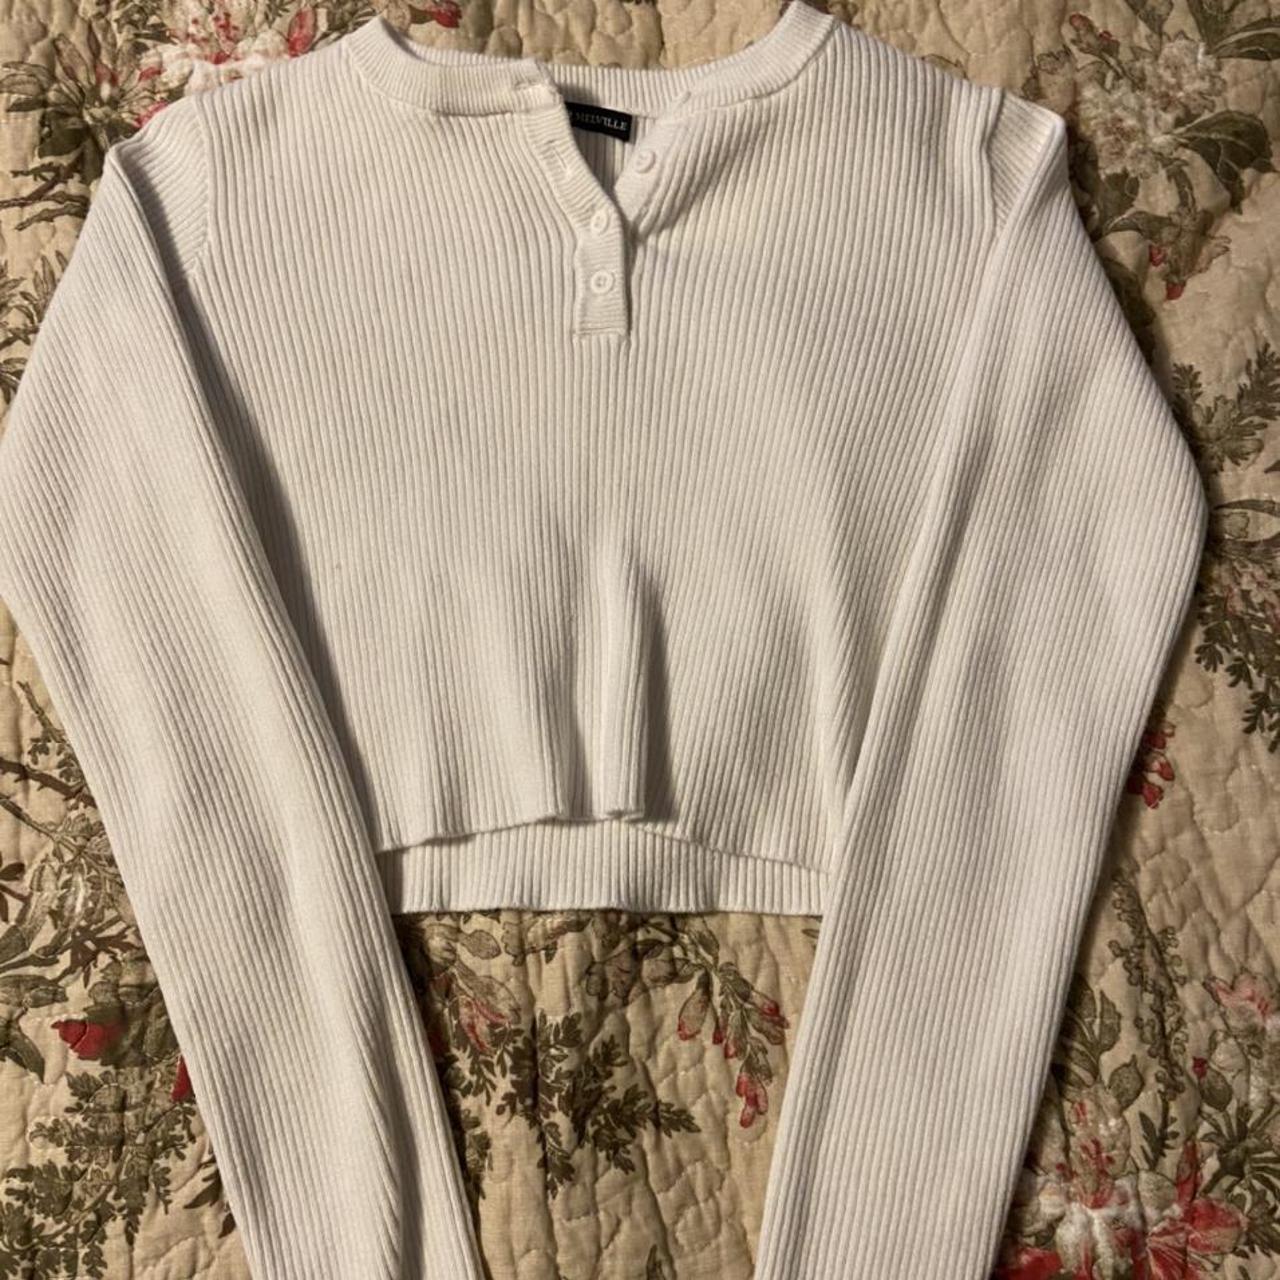 🎀 Brandy Melville White Ribbed Button Up Long Sleeve... - Depop